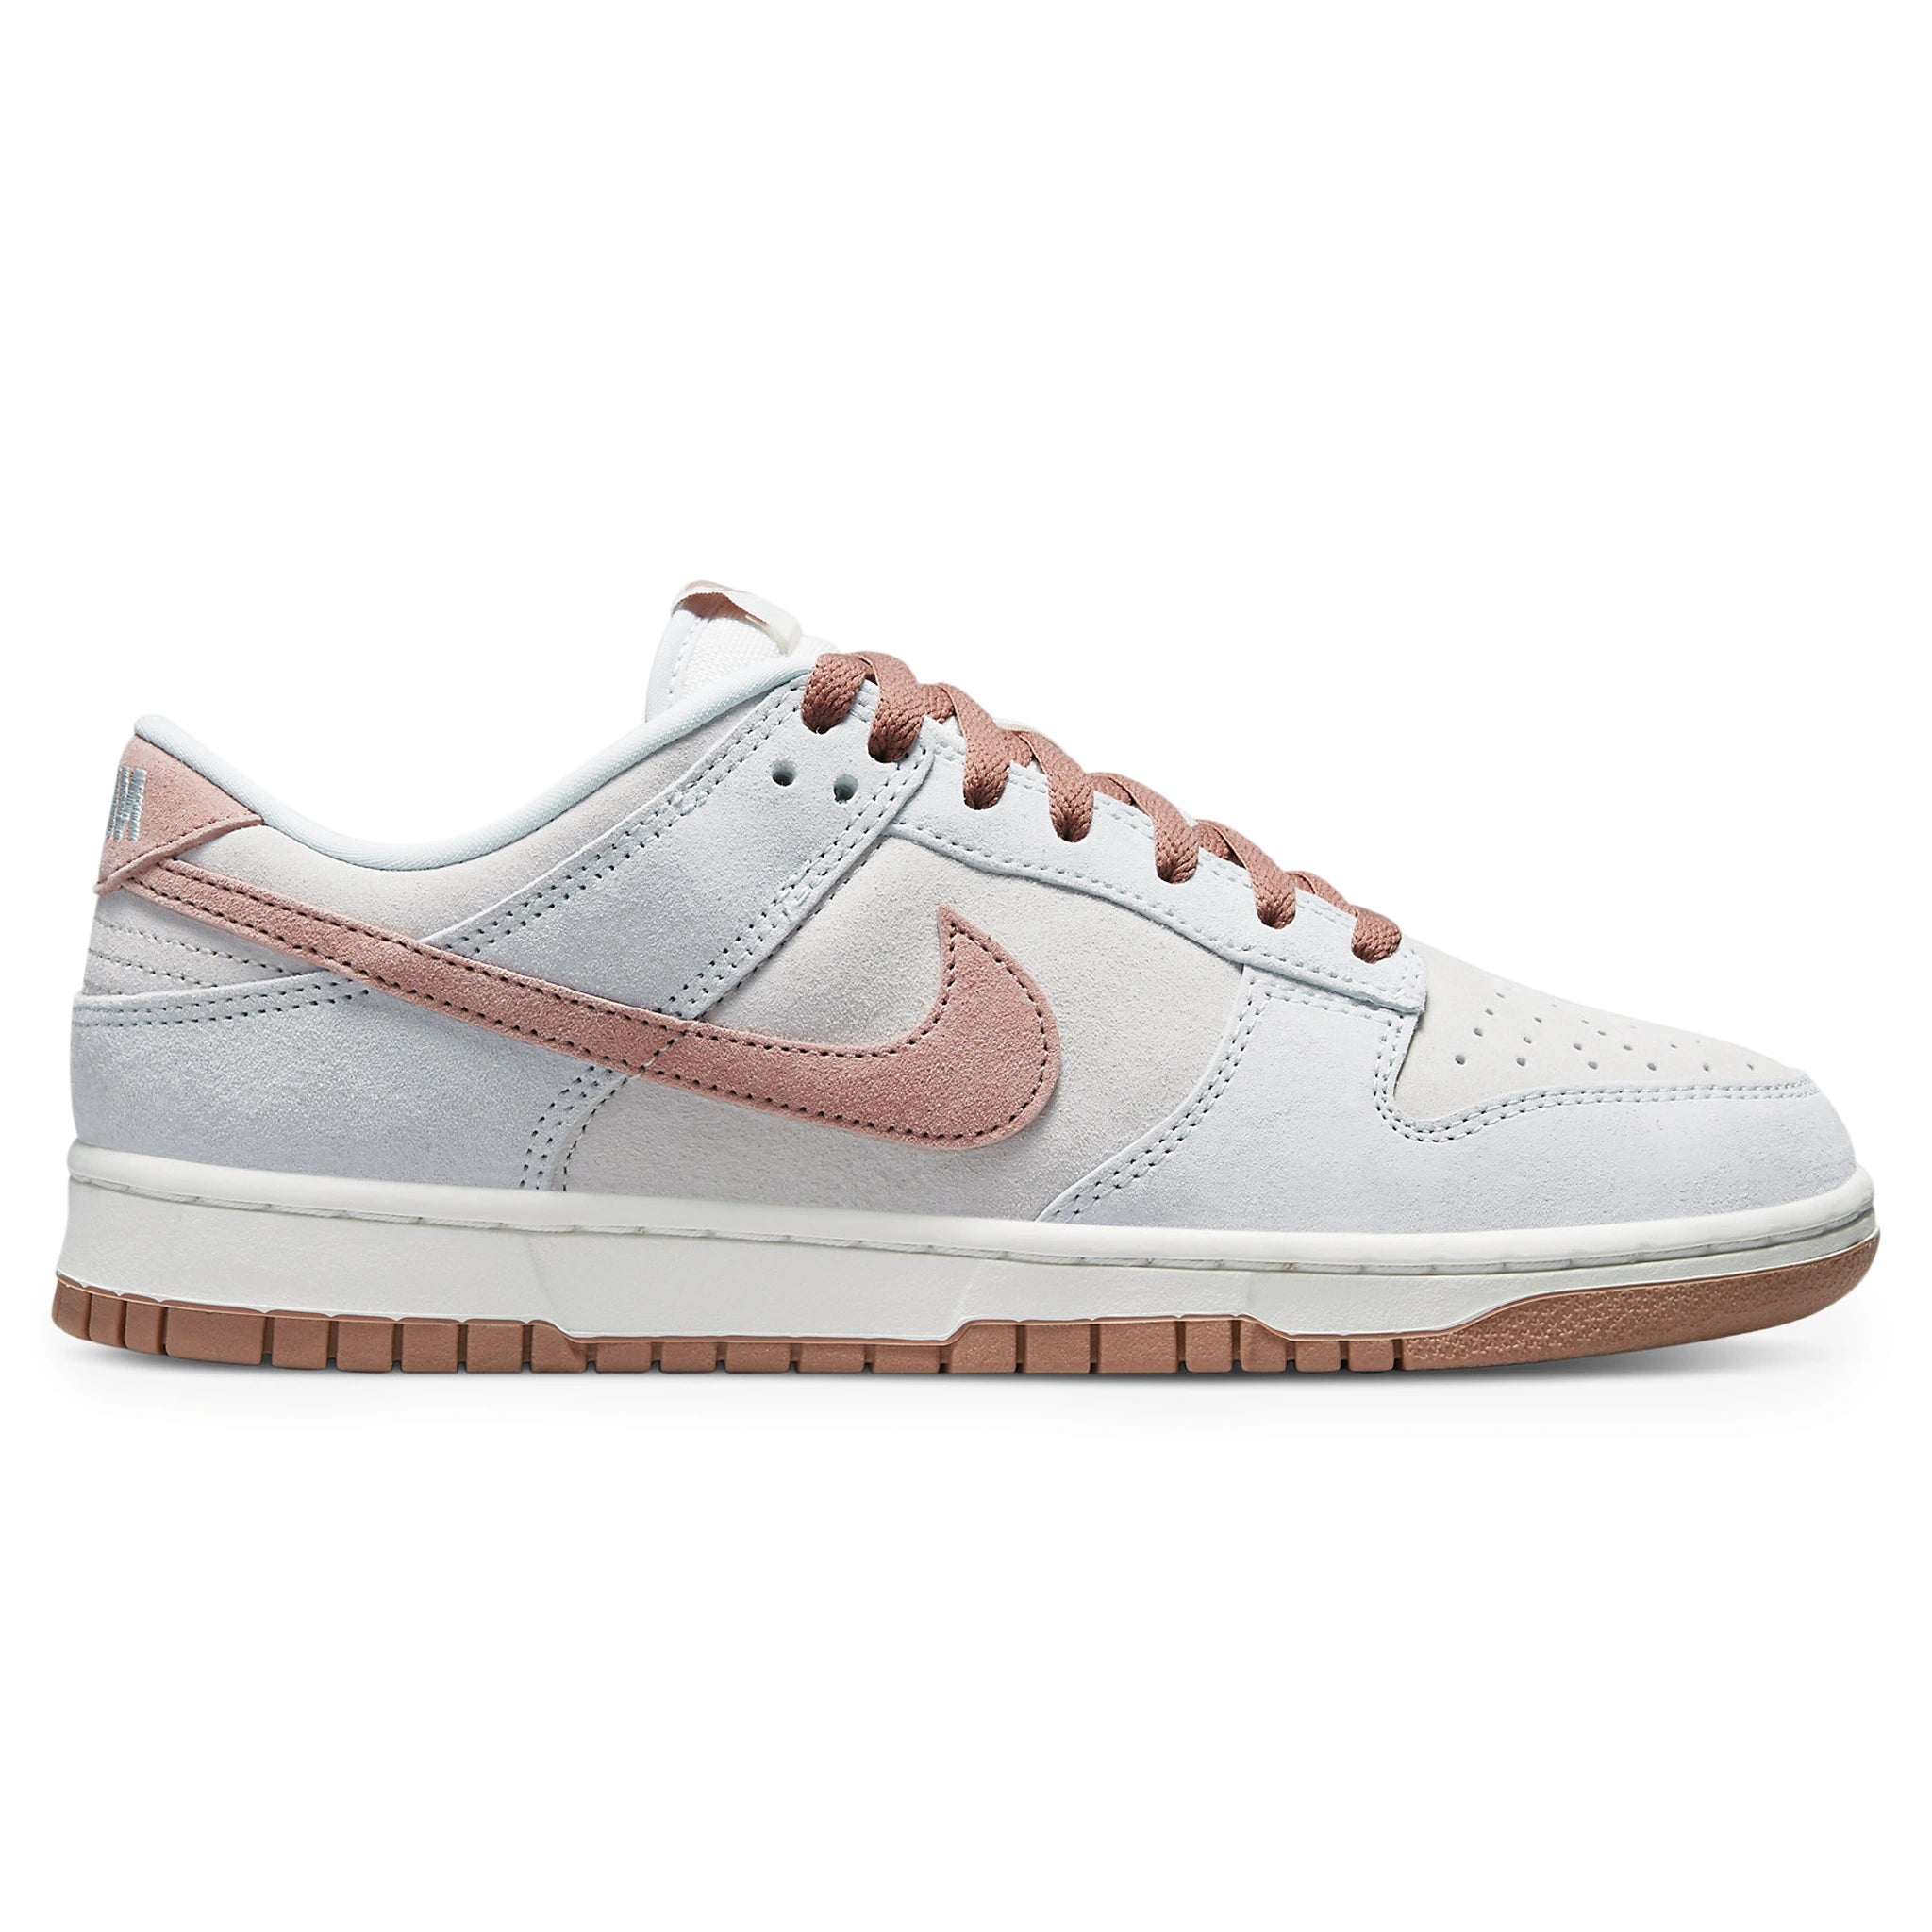 Side view of Nike Dunk Low Fossil Rose DH7577-001